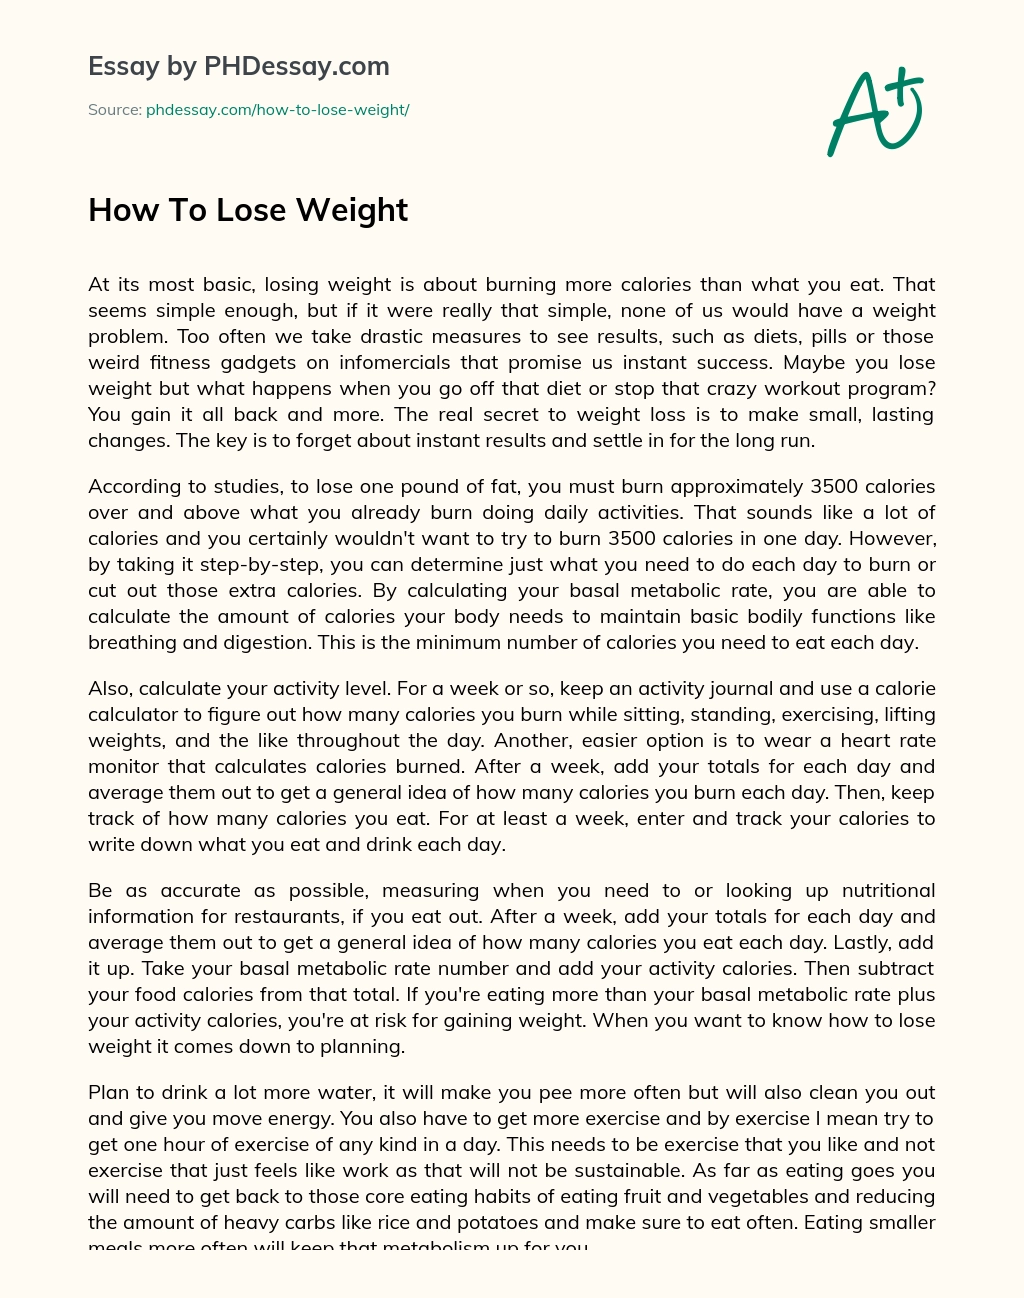 How To Lose Weight essay